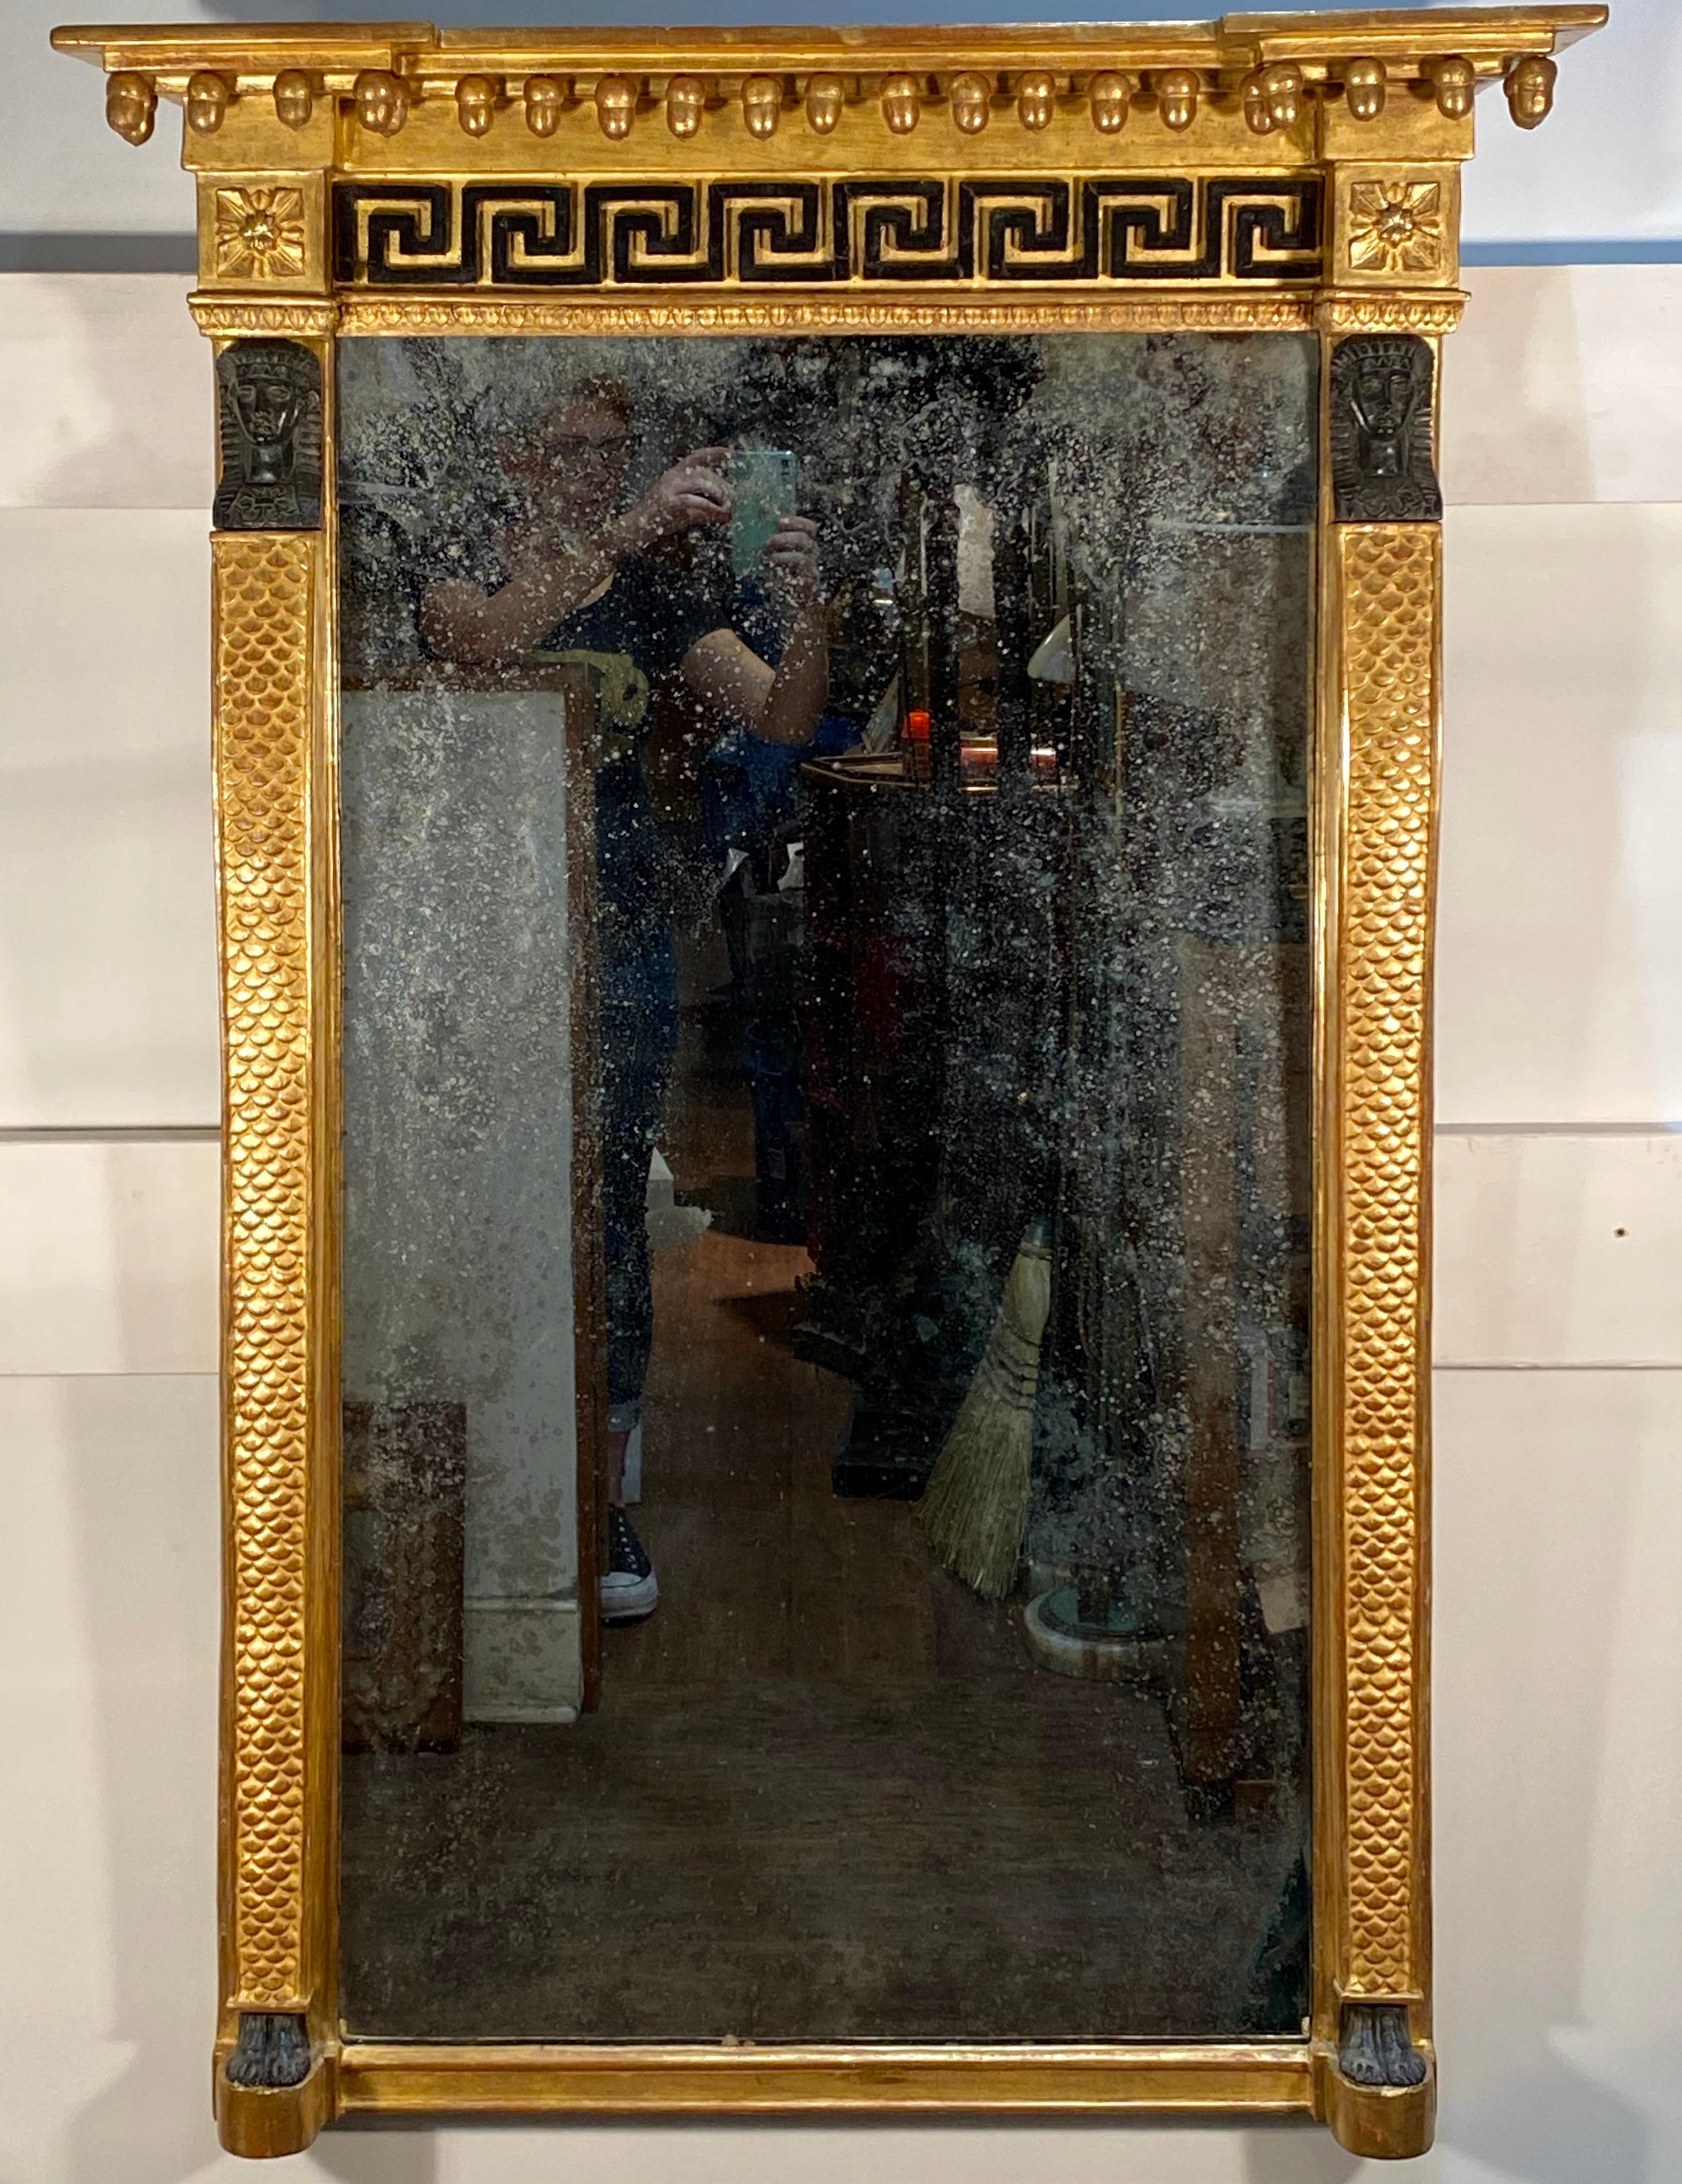 This English mirror shows all of the elegant grandeur of the Regency period by combining Egyptian and Greek motifs. The mummies are exquisitely executed on the caryatid figures with fish scales motif. The pier mirror has an overhanging cornice with